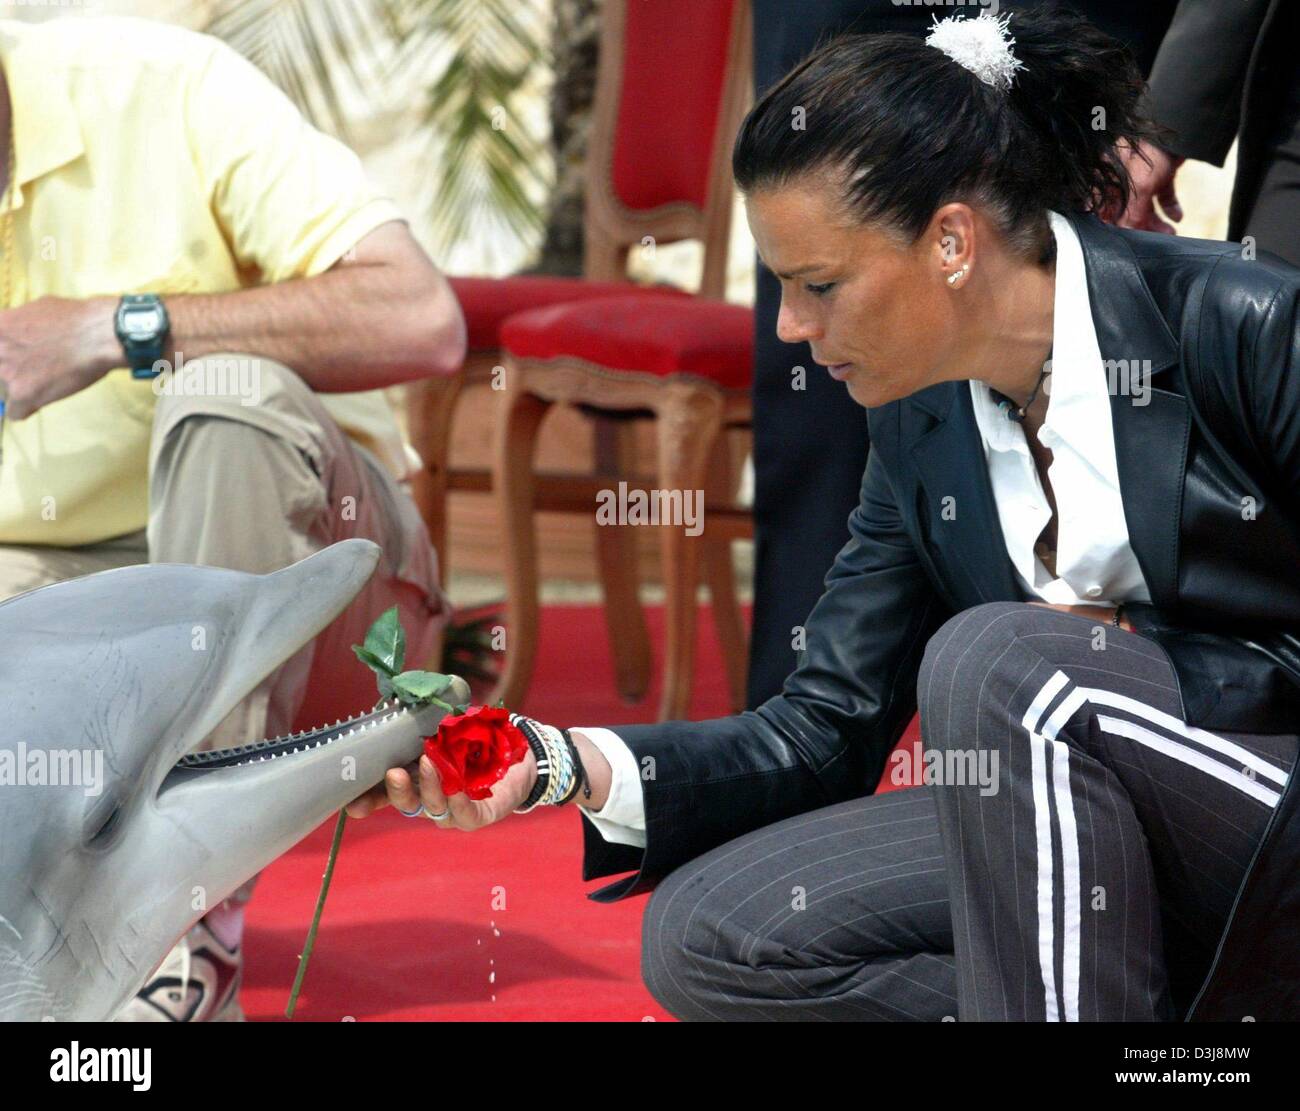 dpa) - Princess Stephanie of Monaco receives a rose from dolphin Magic whom  she had just baptized in the Connyland leisure park in Lipperswil,  Switzerland, 2 May 2004. The Princess came to